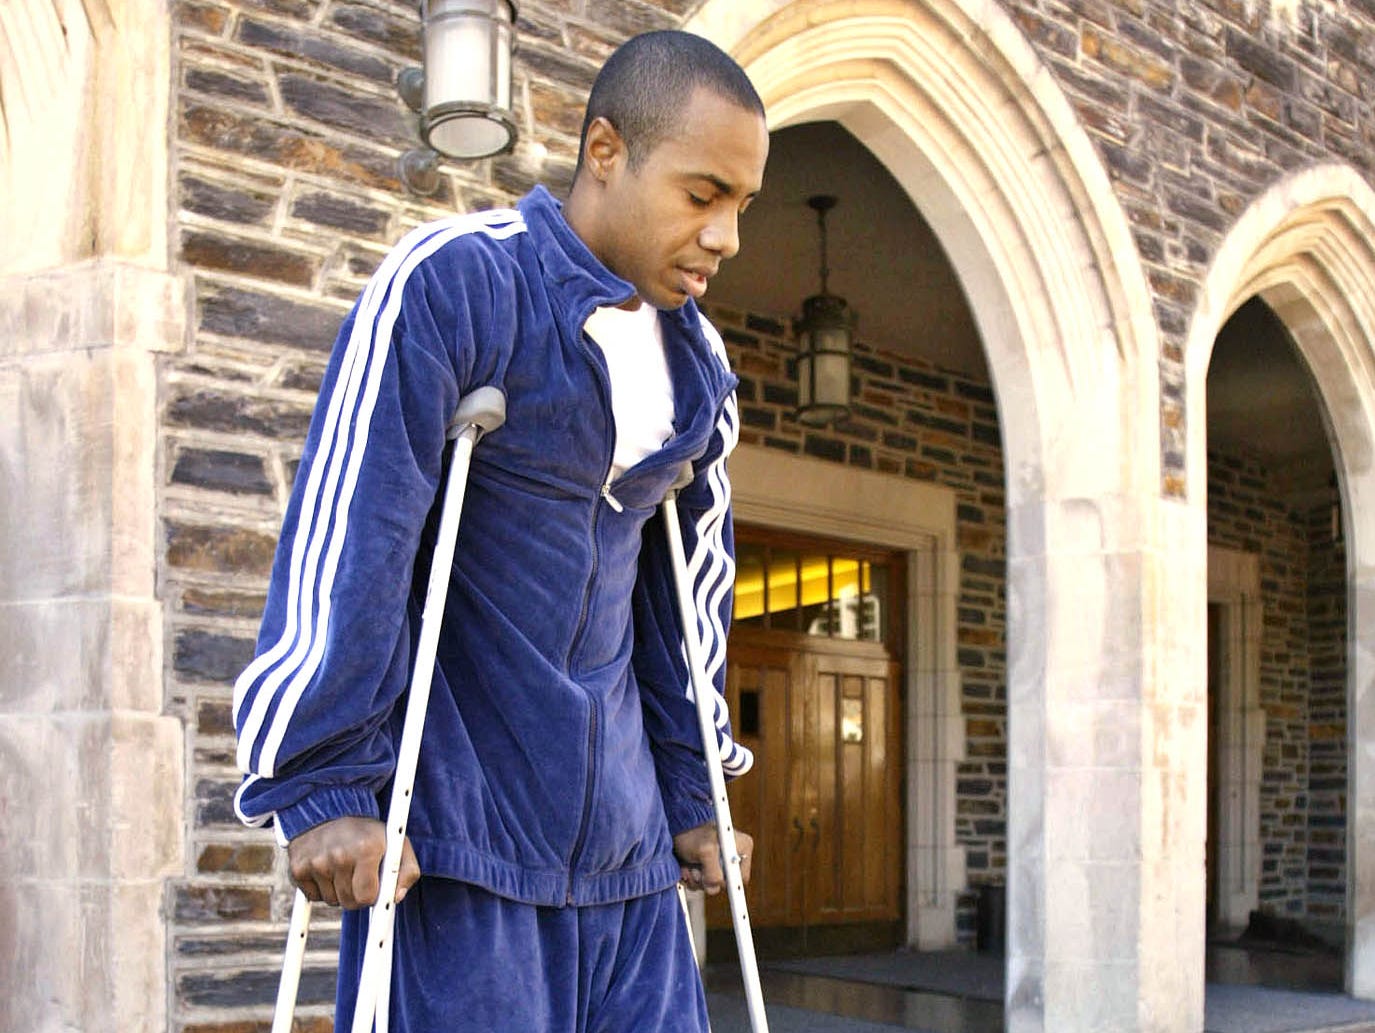 Jay Williams, Chicago Bulls basketball player and former Duke All-American, arrives at Duke's Cameron Indoor Stadium, Monday, Sept. 29, 2003, in Durham, N.C., for an interview. Williams was hurt earlier this year in a motorcycle accident.